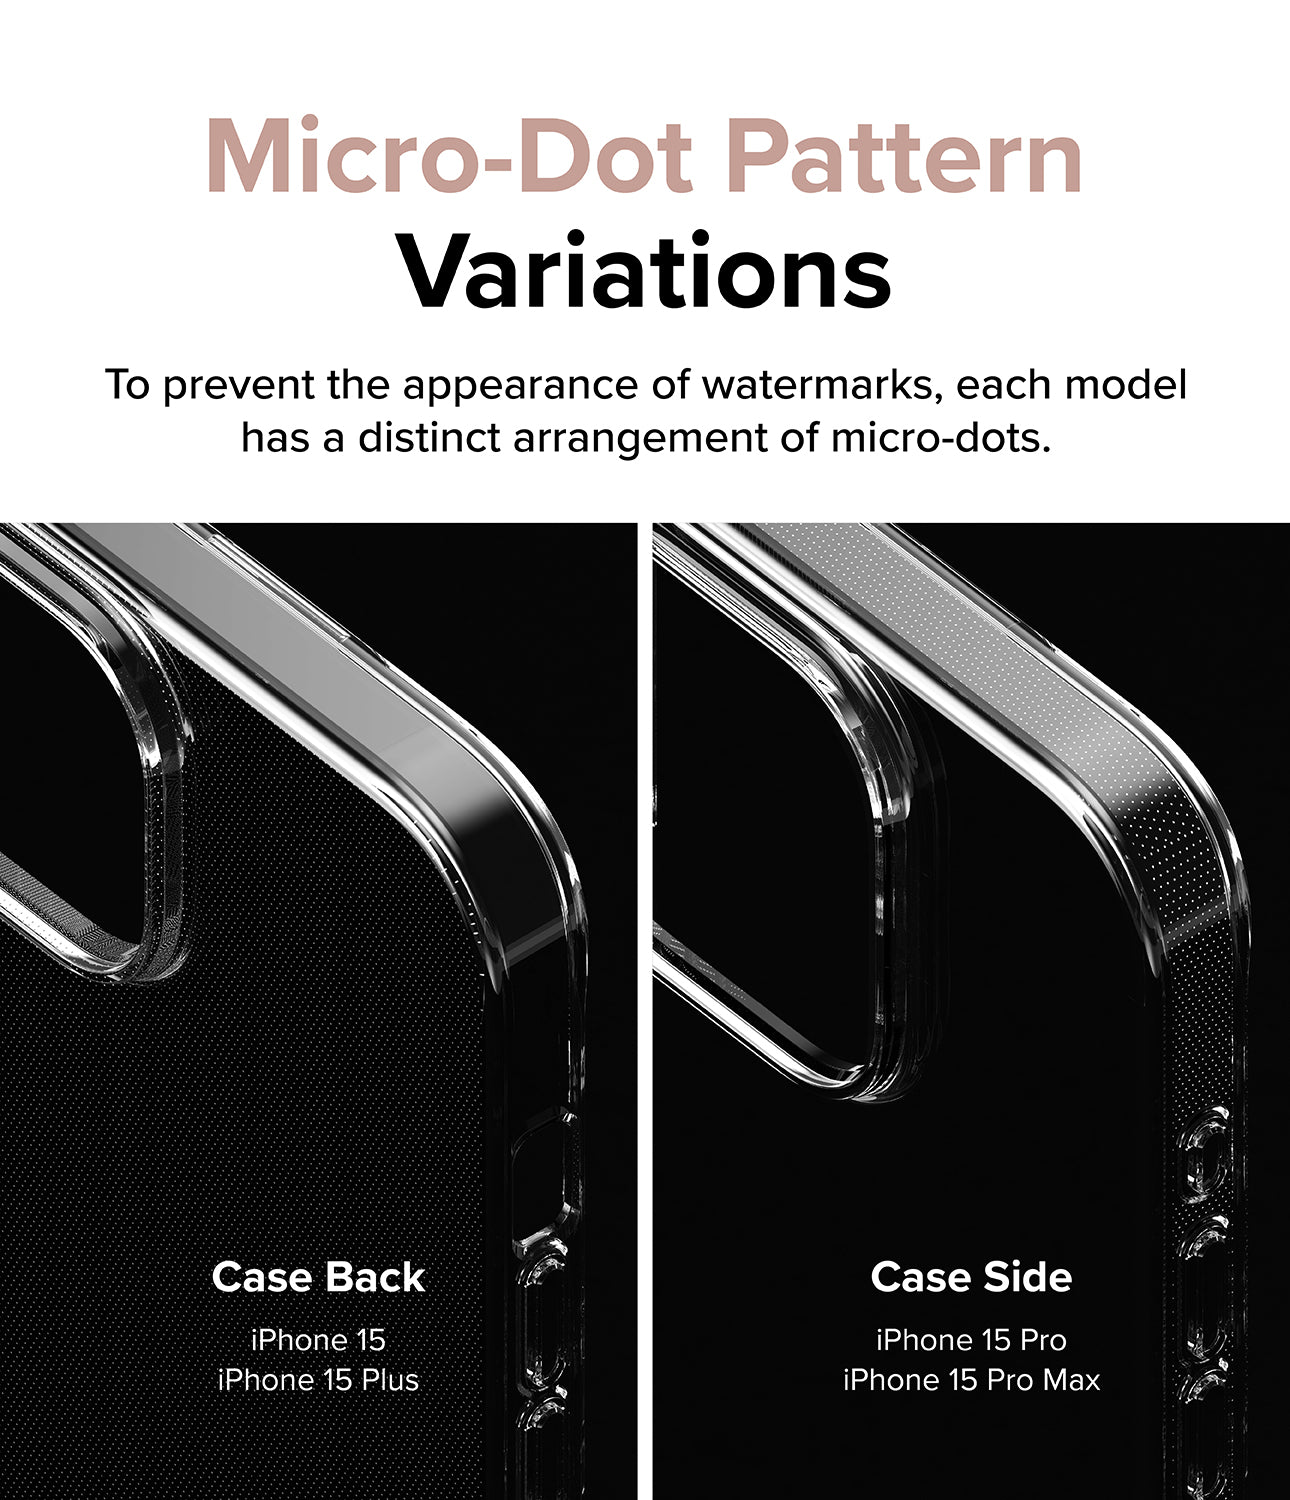 iPhone 15 Case | Air - Micro-Dot Pattern Variations. To prevent the appearance of watermarks, each model has a distinct arrangement of micro-dots.